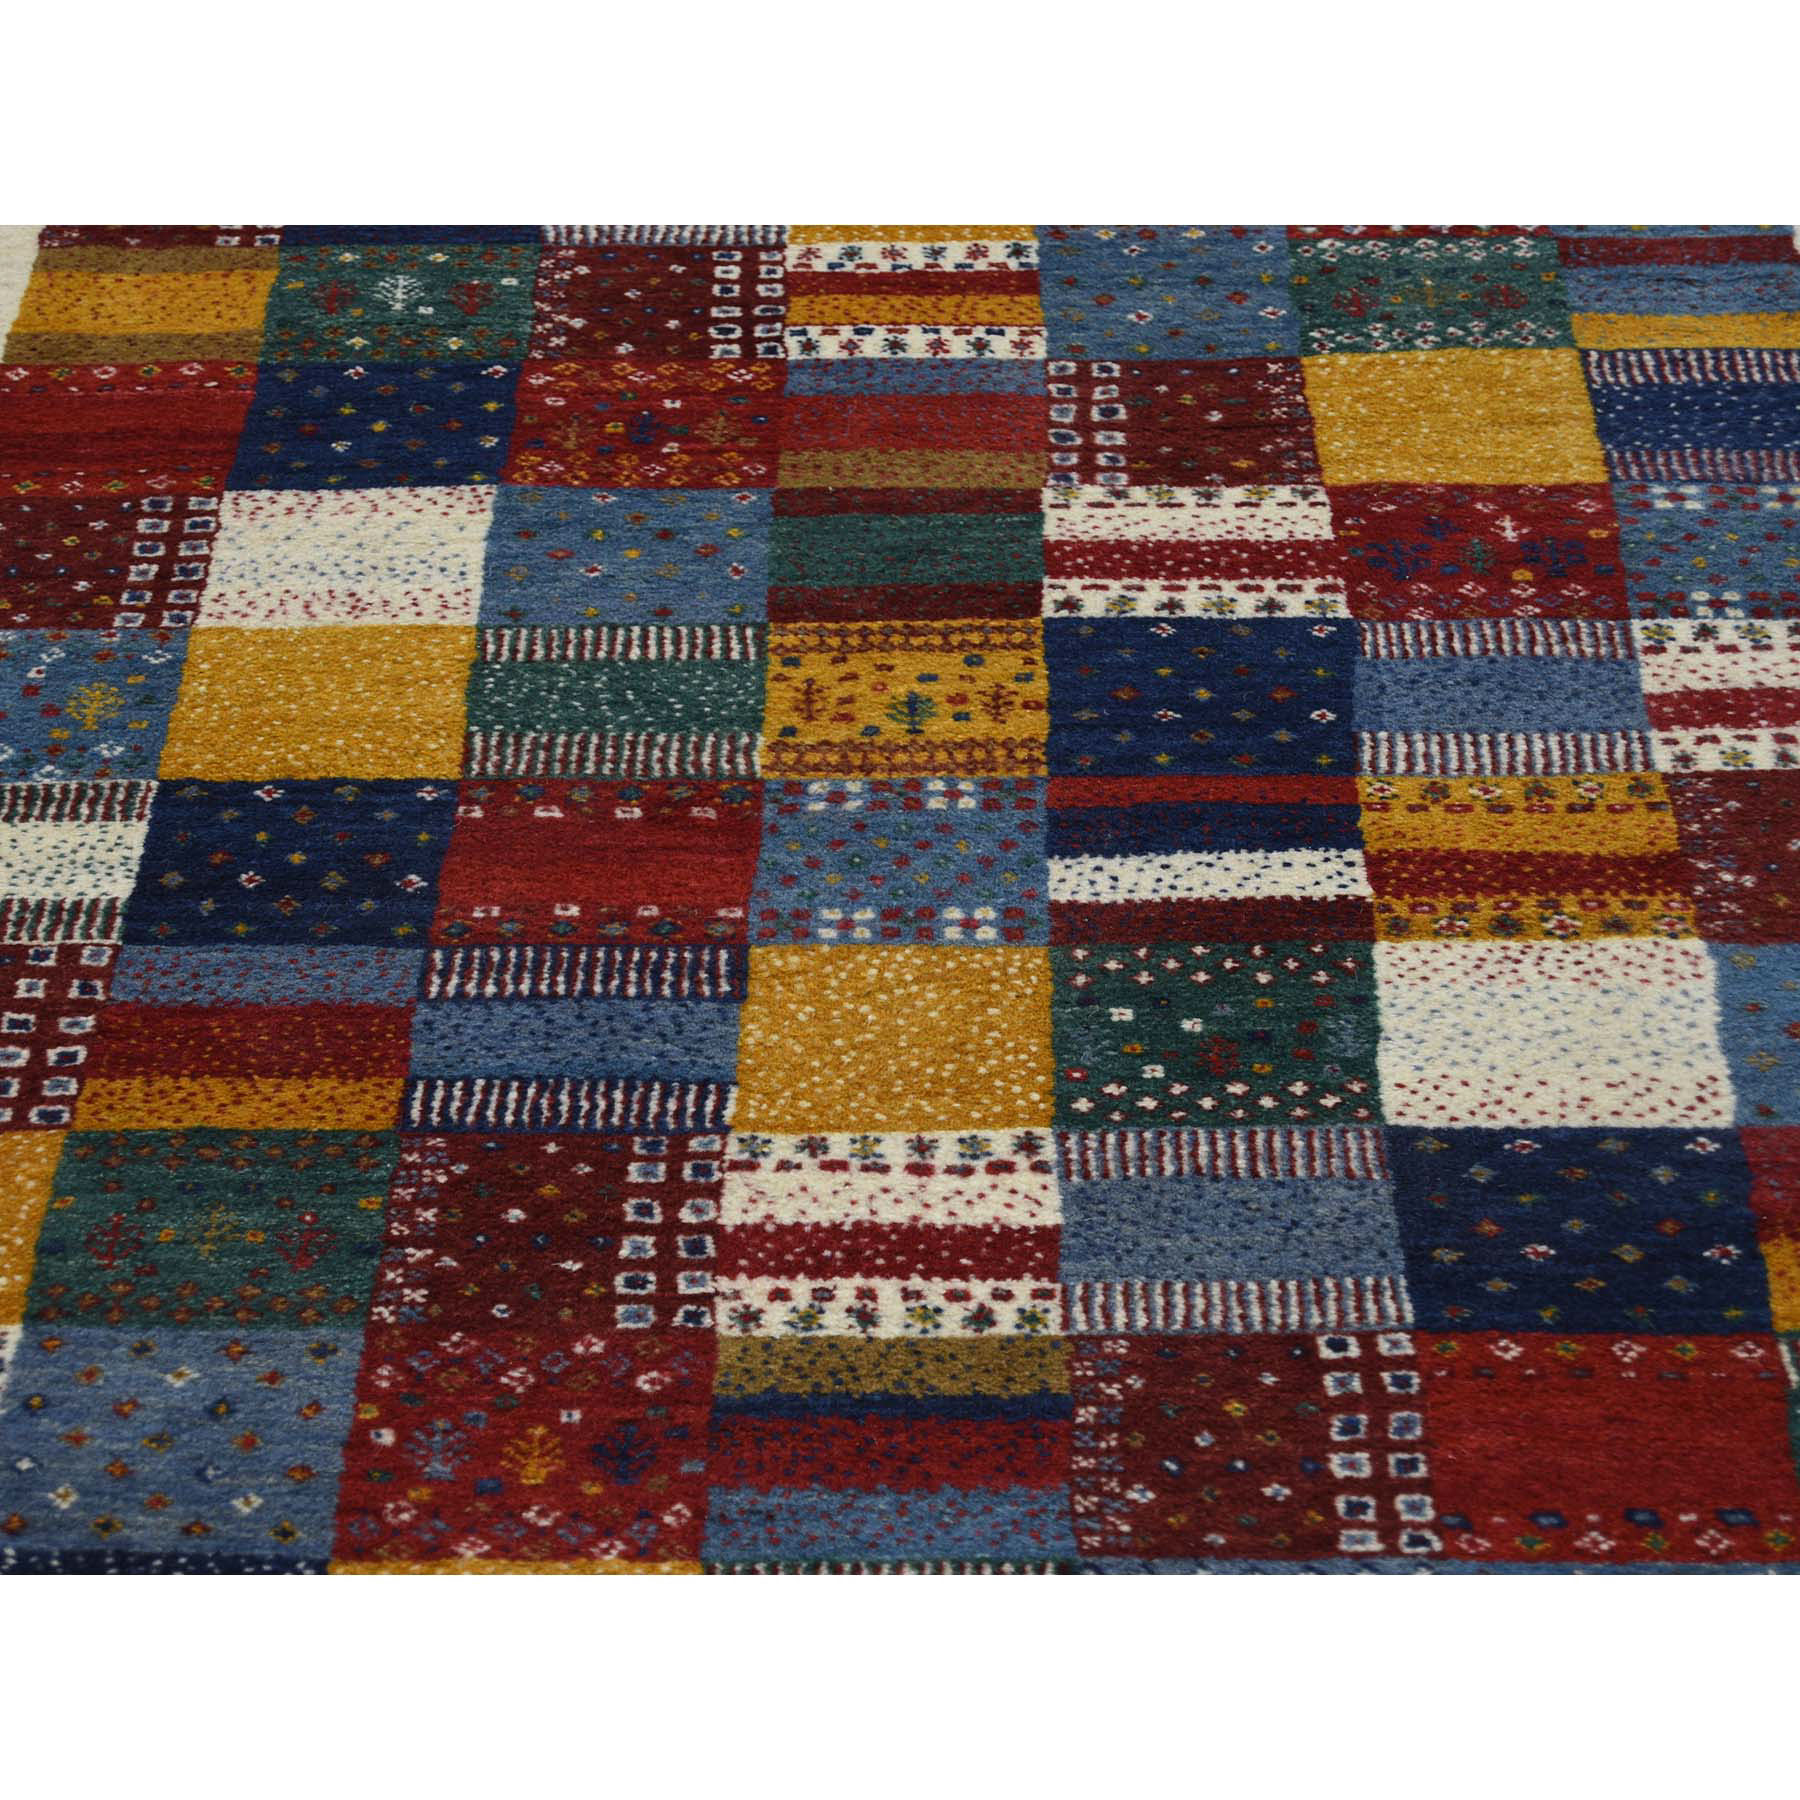 4-x6- Persian Wool Hand Knotted Lori Buft Gabbeh Patchwork Design Rug 